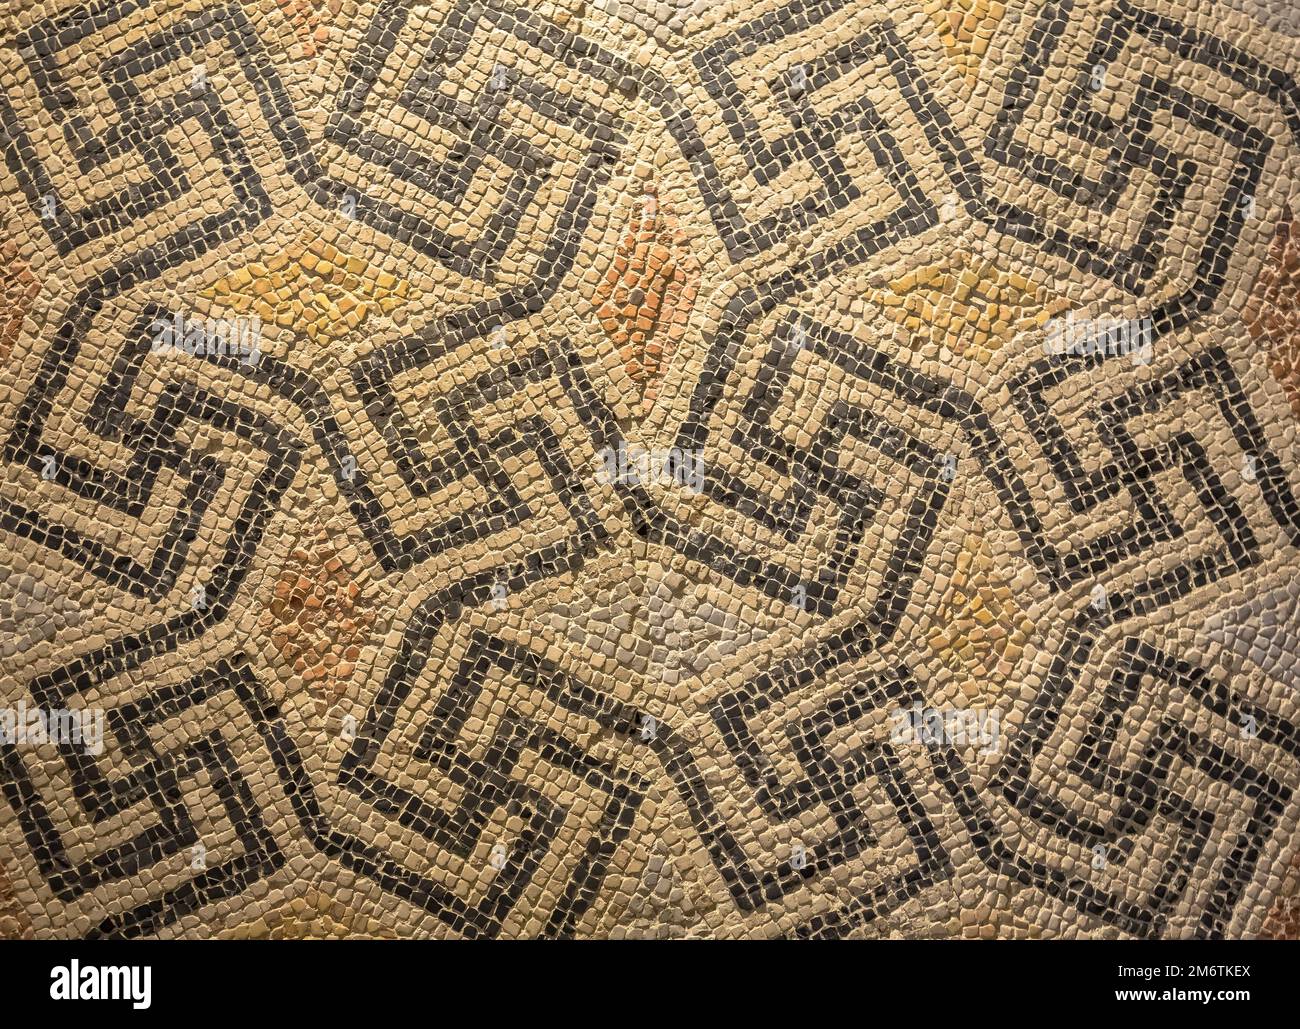 Swastika symbol in ancient Celtic mosaic decoration. Design for an old style background. Stock Photo